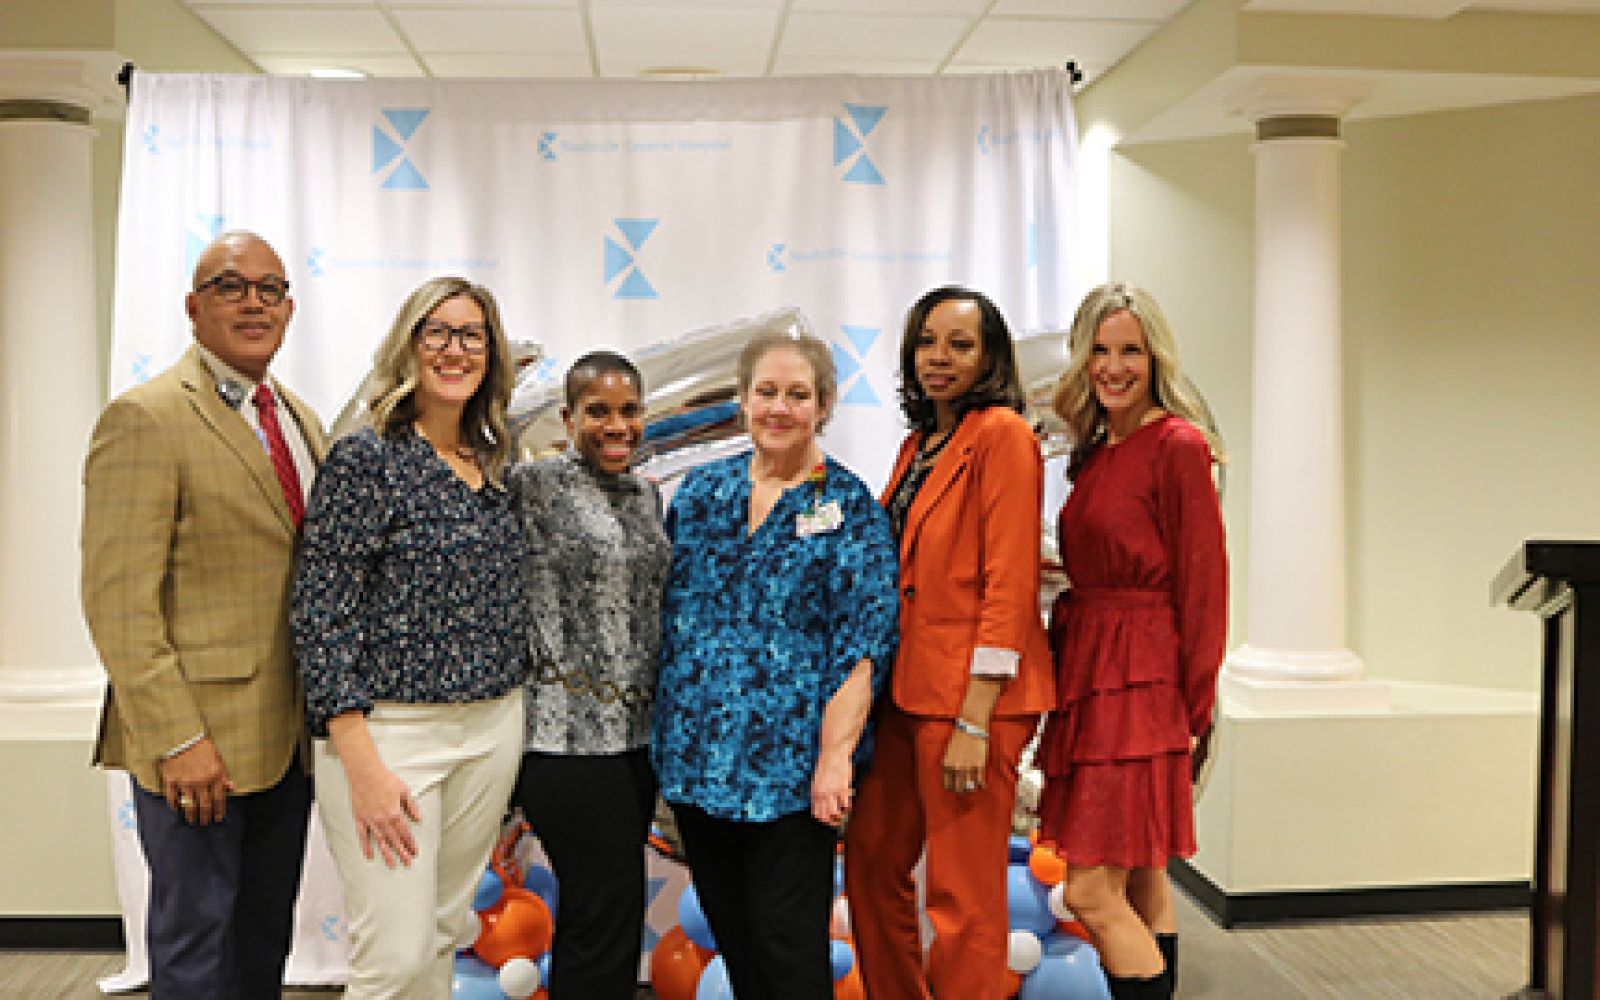 Nashville General Hospital (NGH) completed its second year of the Employee Wellness Program (EWP).